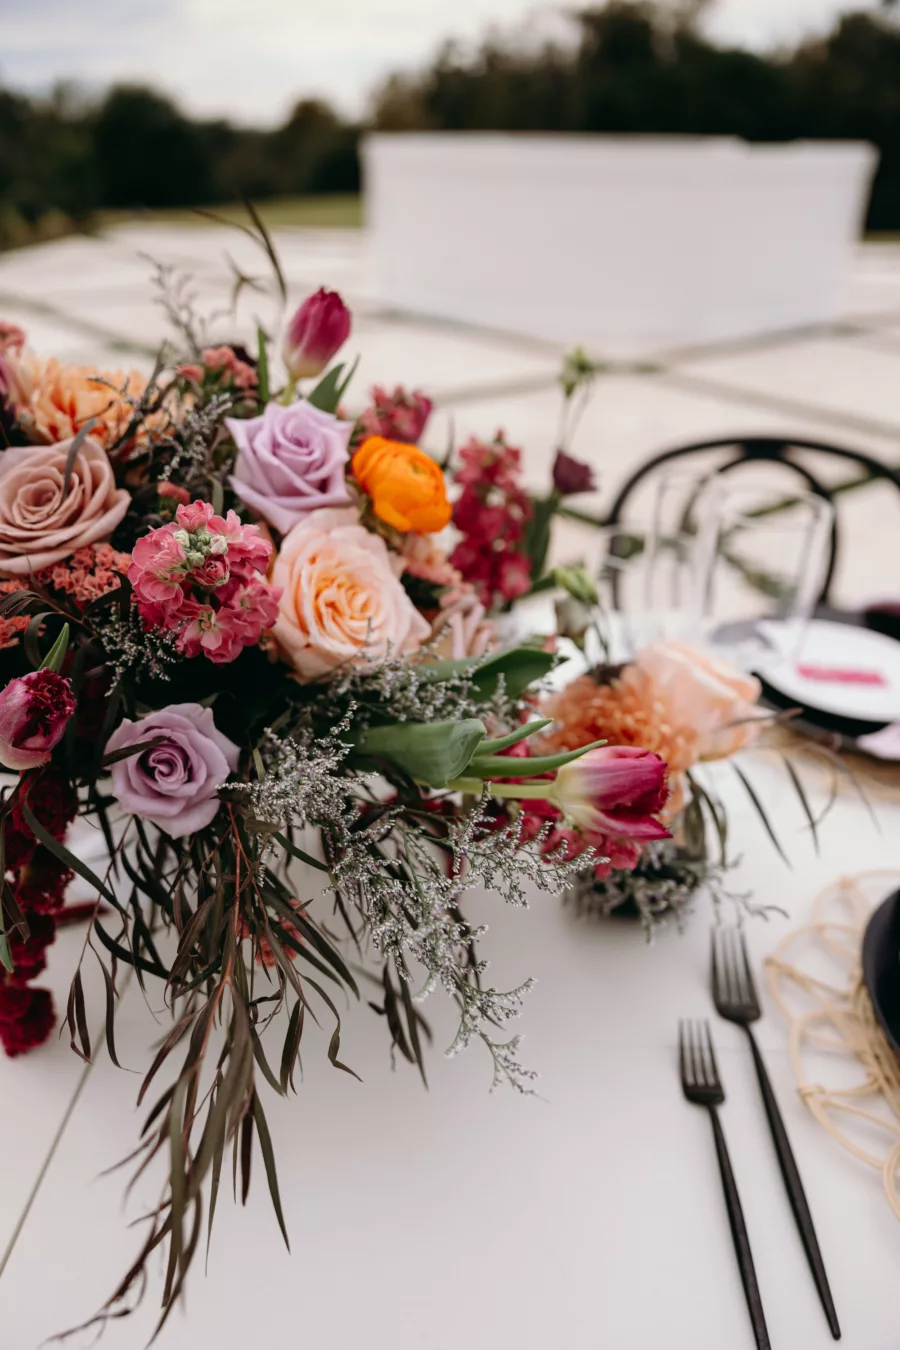 Purple and Orange Roses, Pink Tulips, and Greenery Moody Fall Wedding Reception Centerpiece Ideas | Tampa Bay Florist Save The Date Florida